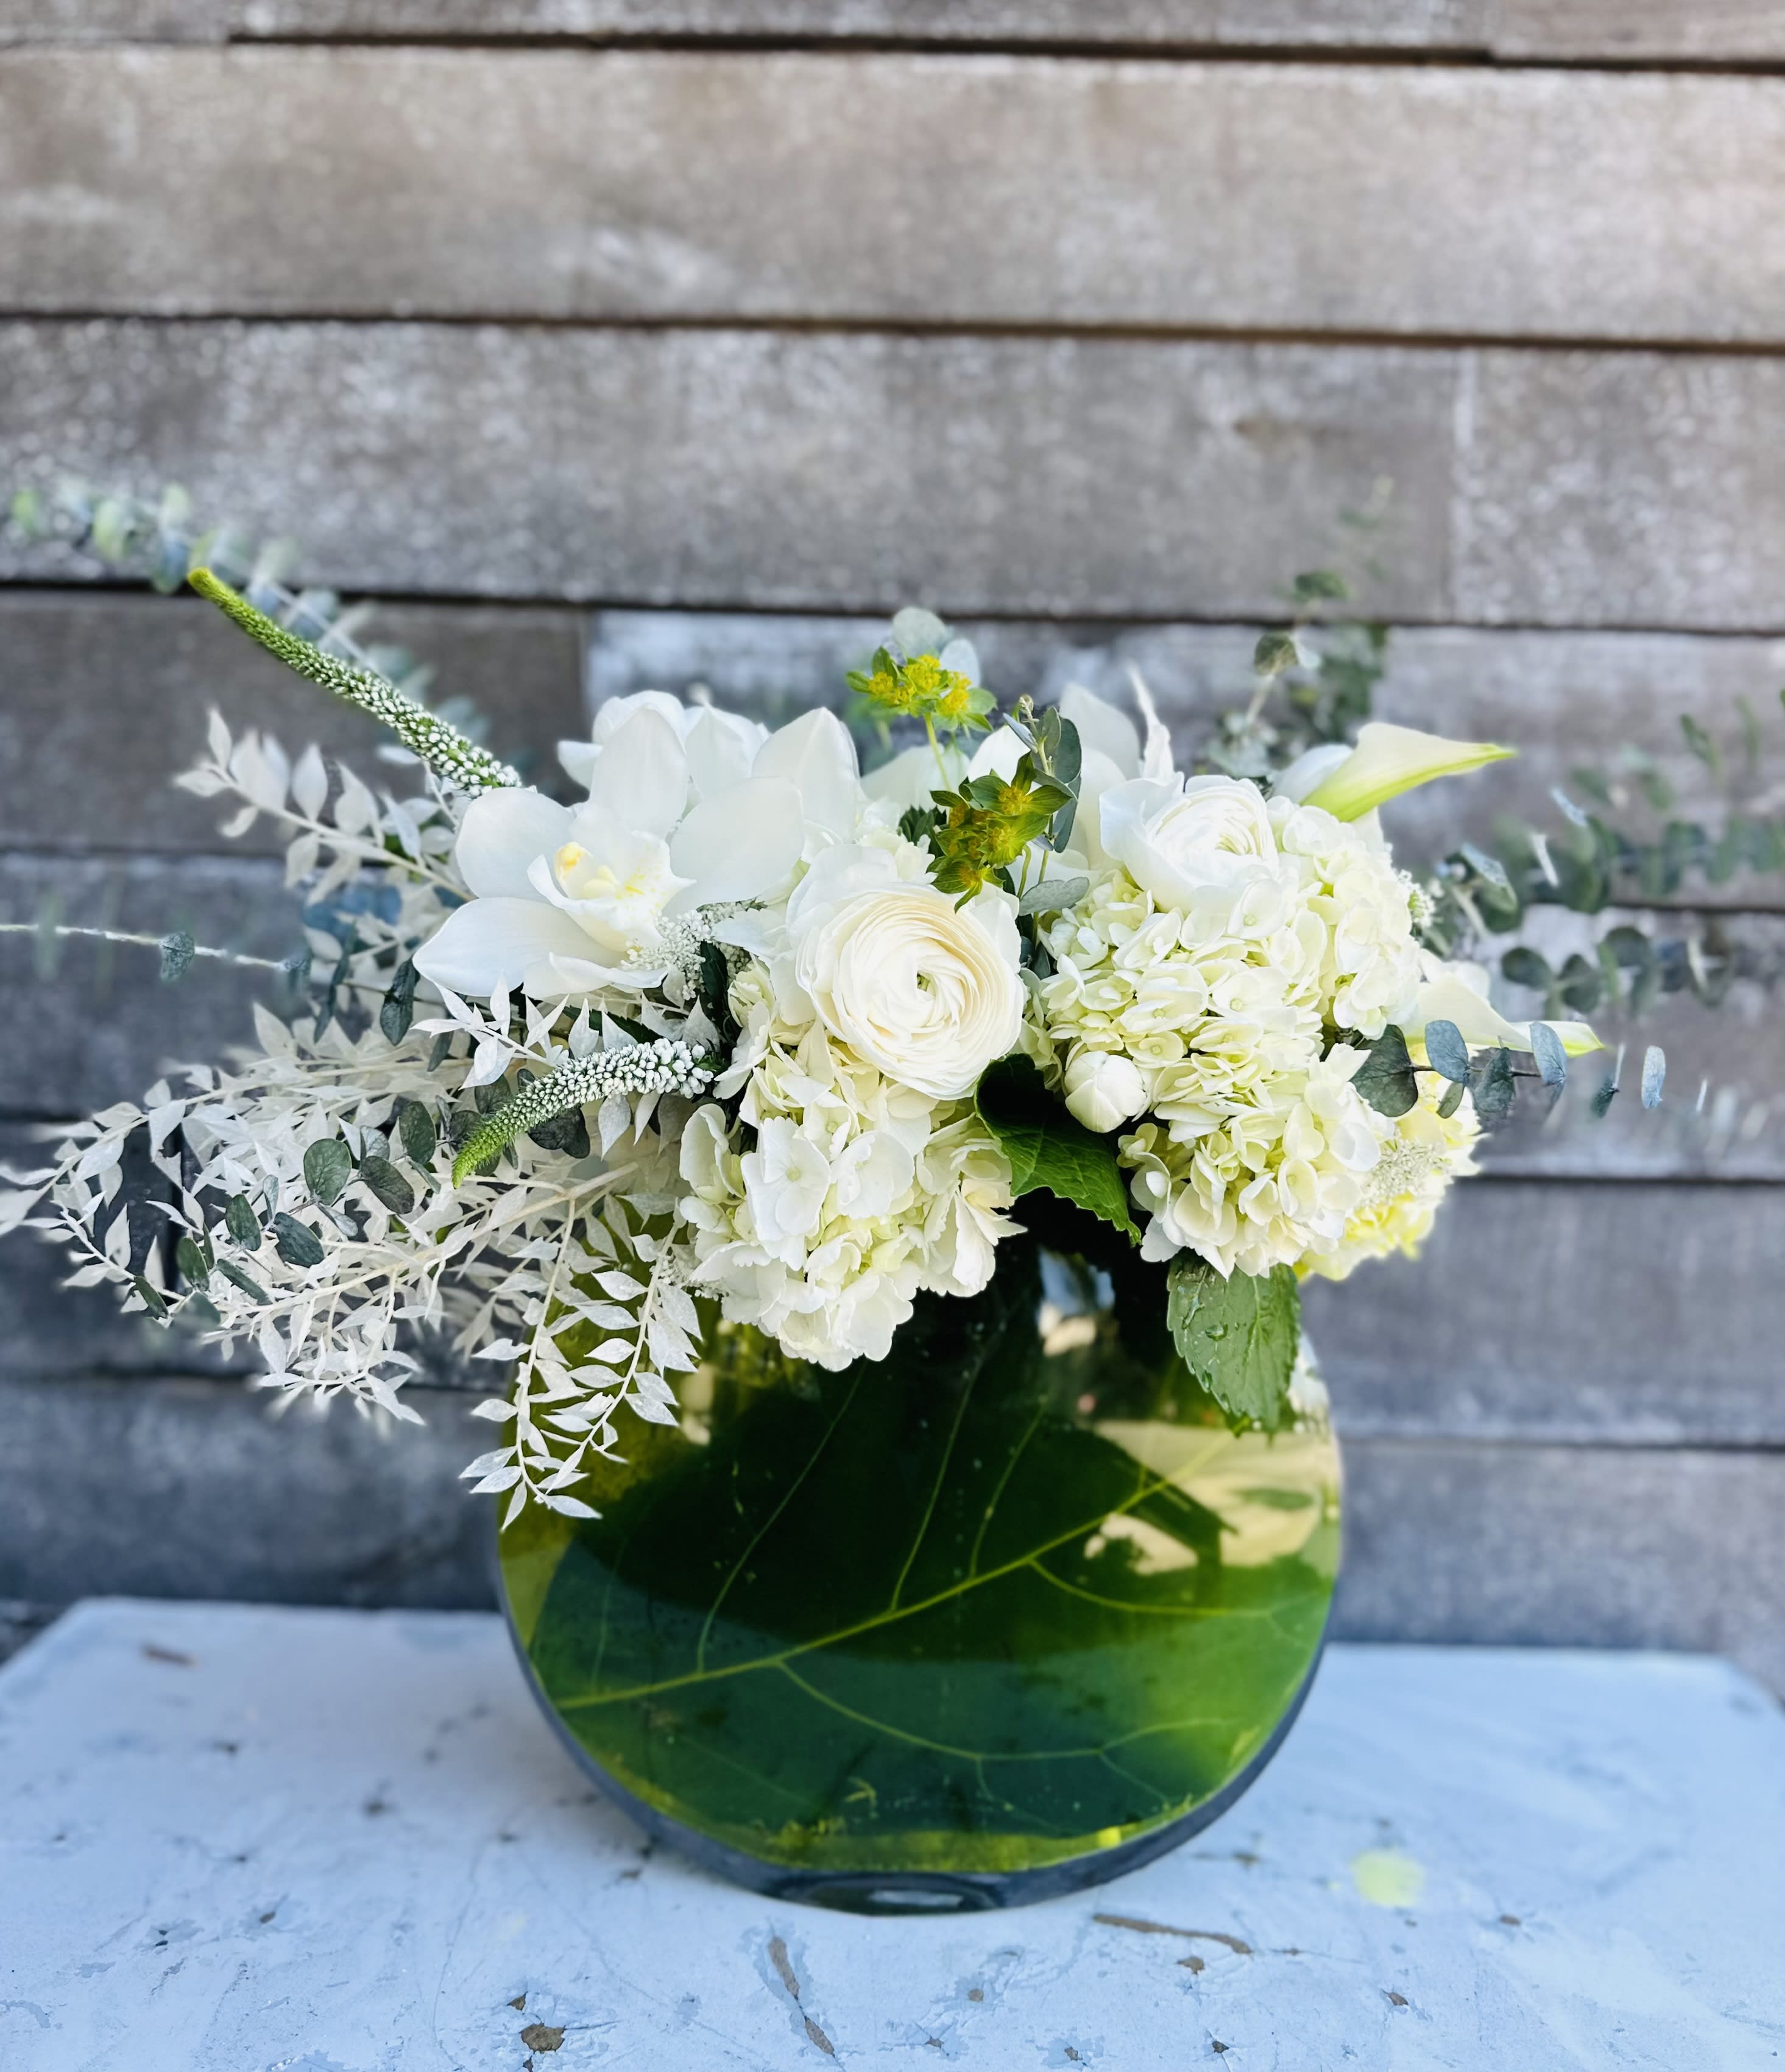 Fiddle luxe  - Fiddle fig leaves inside of an oval glass container with a spray of gorgeous white flowers including orchids on the top